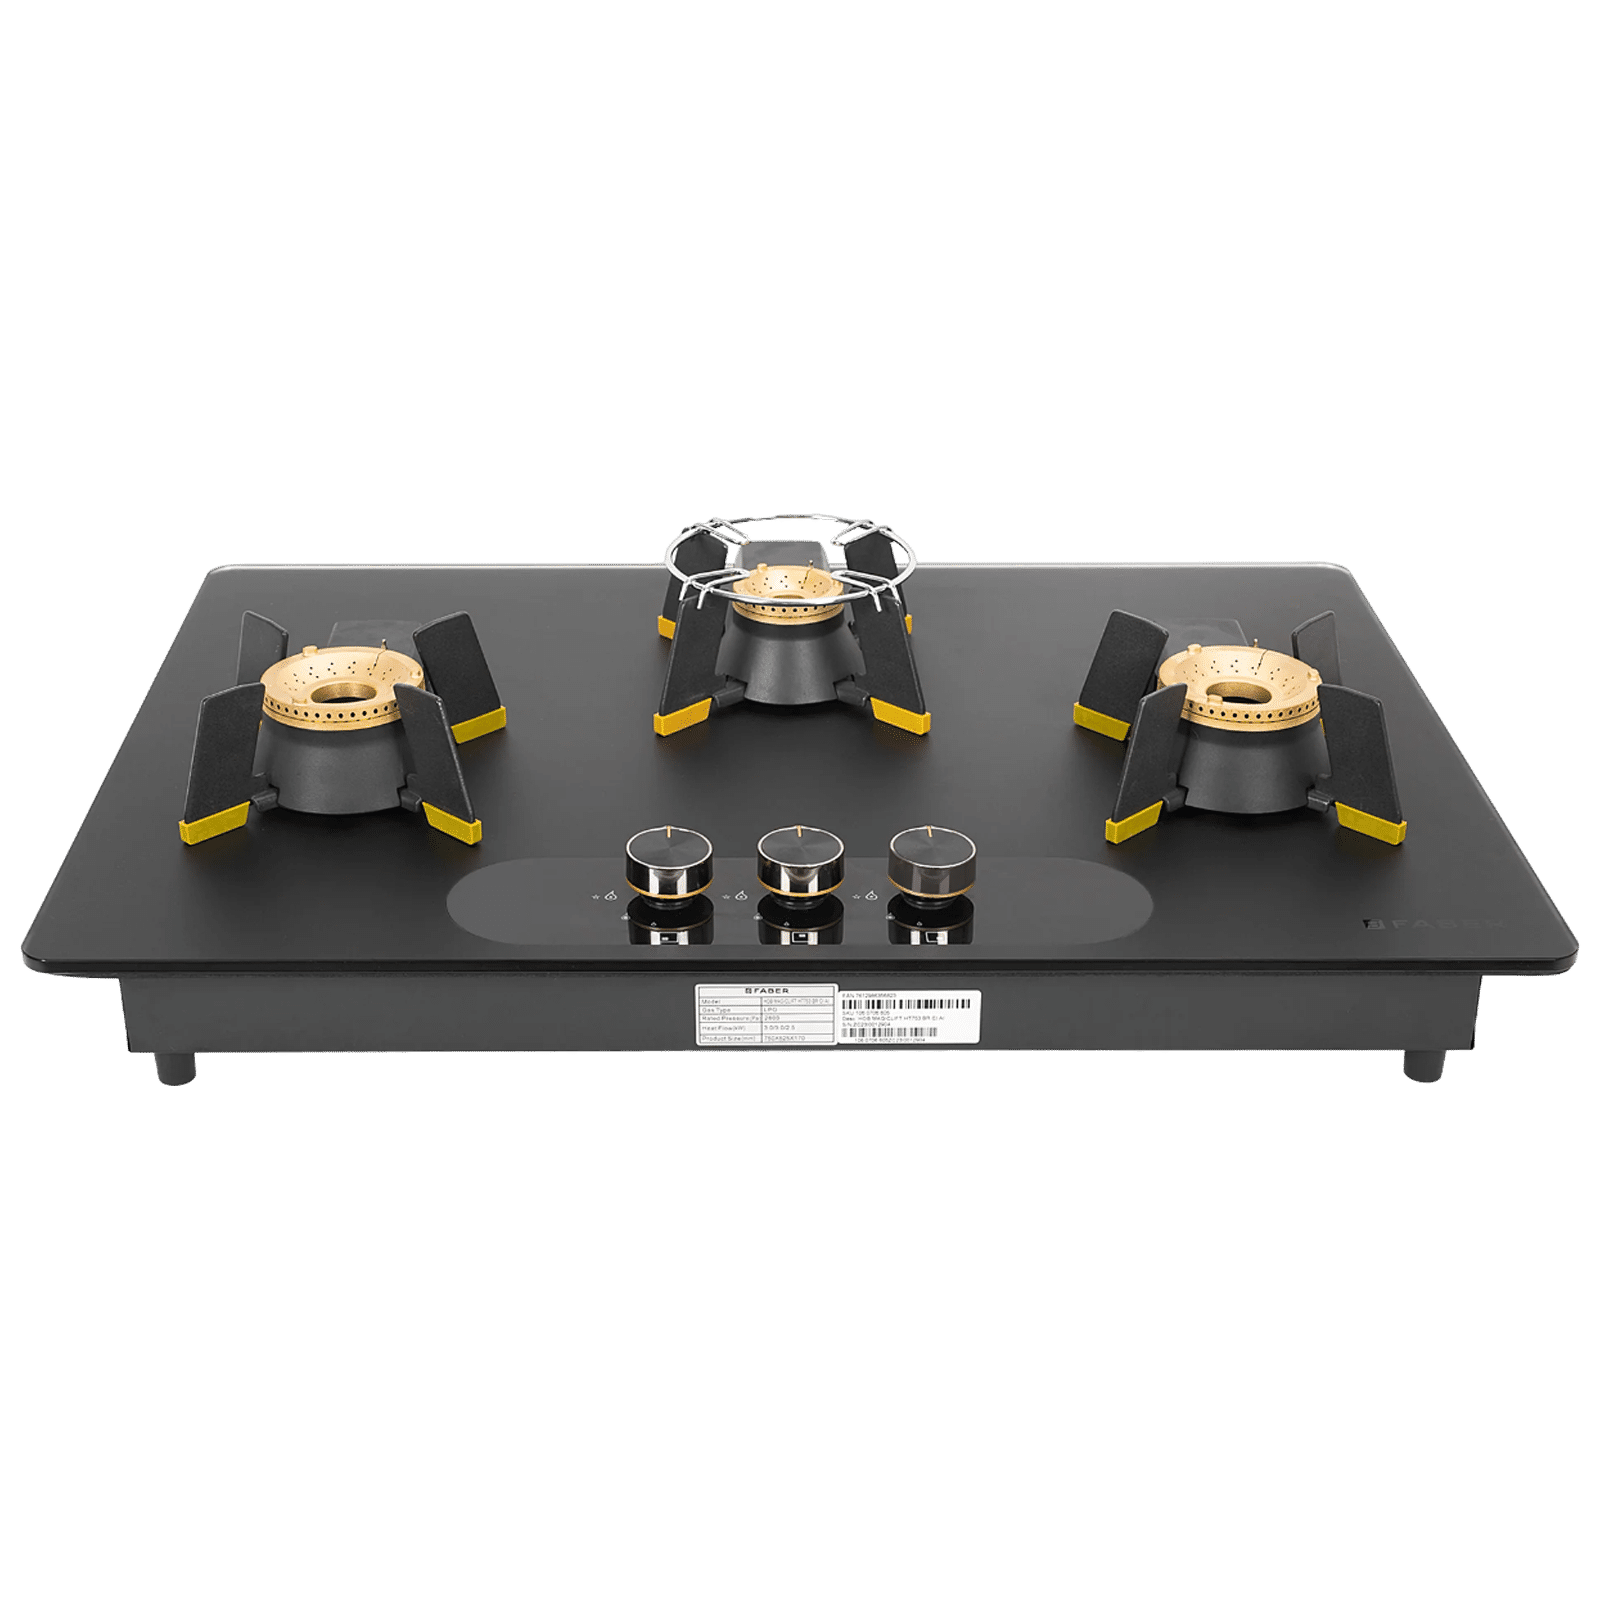 Buy FABER Magiclift HT753 Toughened Glass Top 3 Burner Automatic Hob (Lift and Lock Feature, Black) Online - Croma